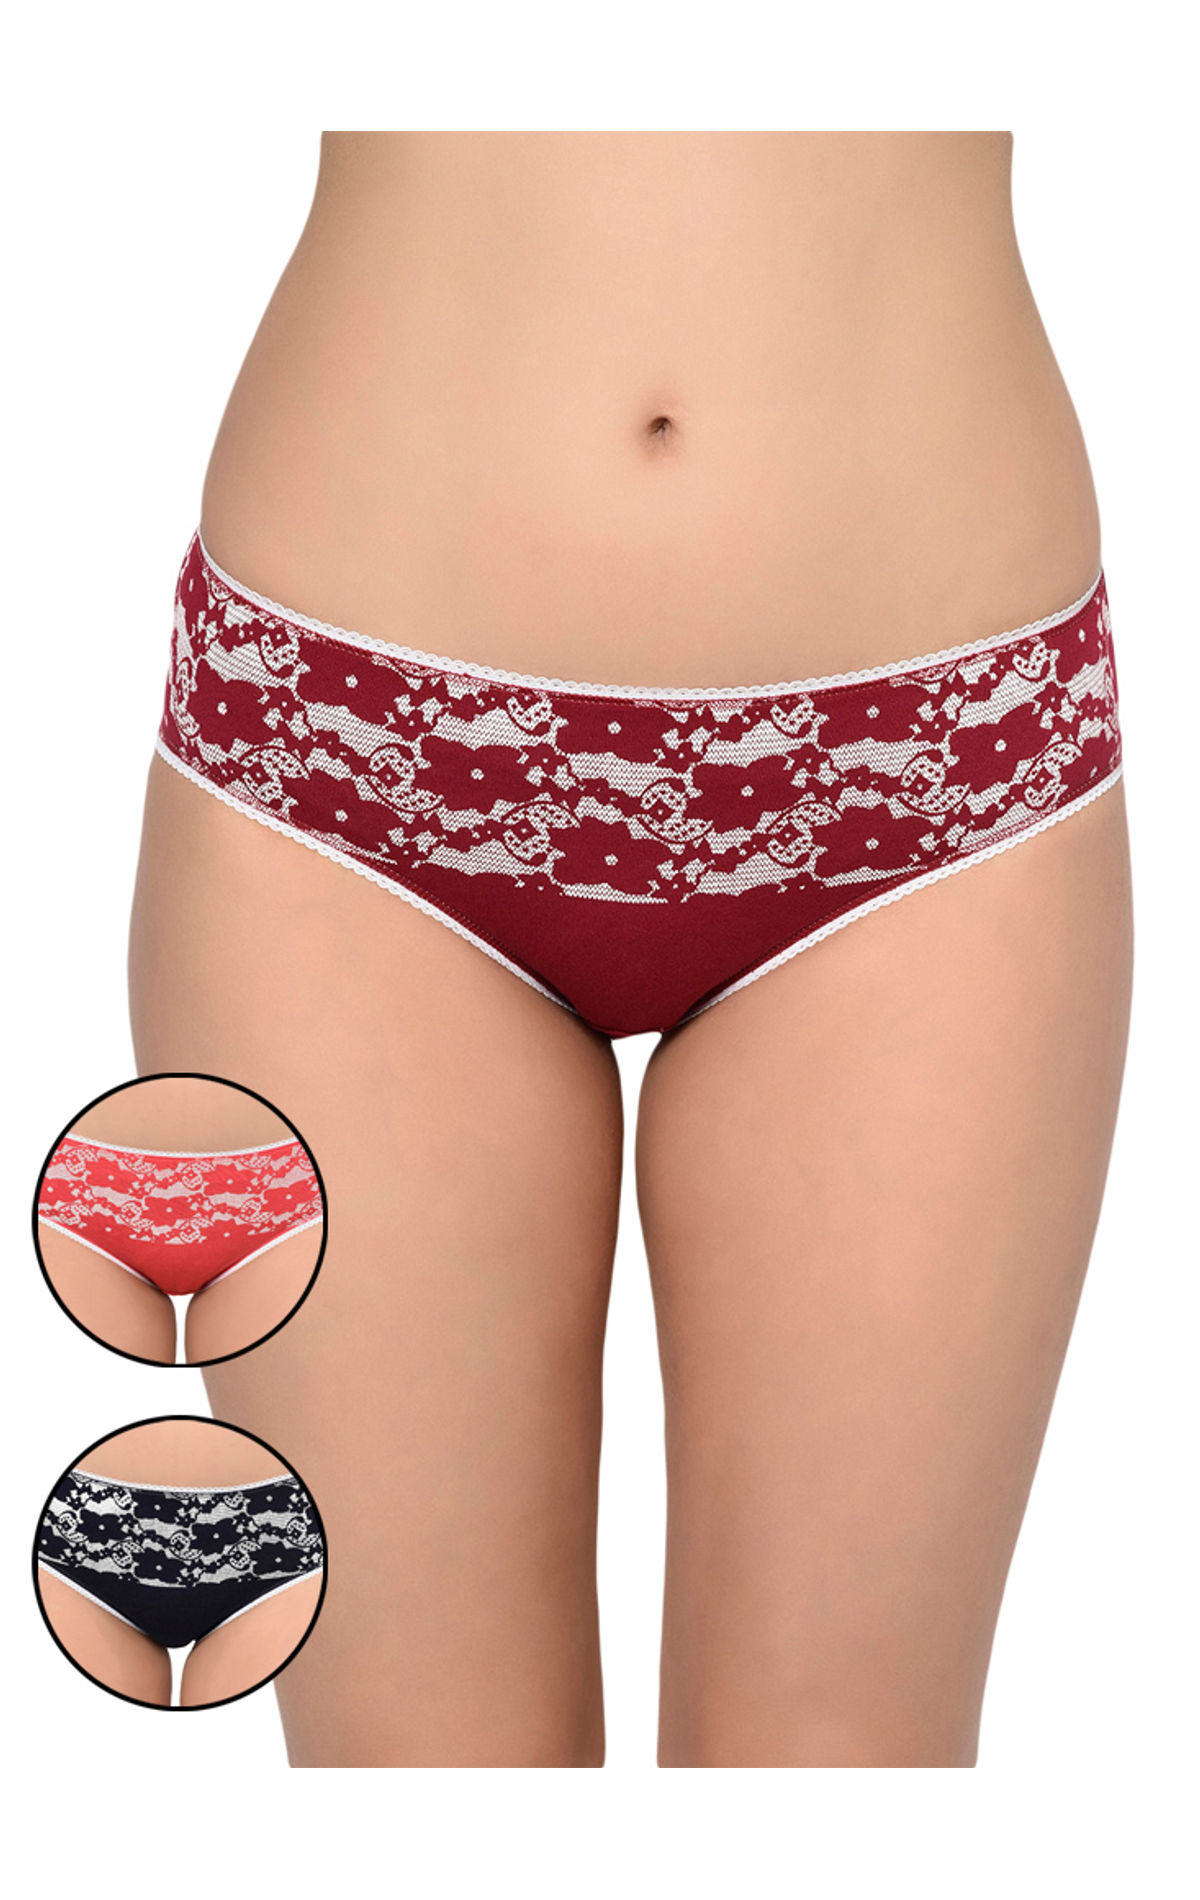 Bodycare Pack Of 3 Printed Panty In Assorted Colors-4531-3pcs, 4531-3pcs